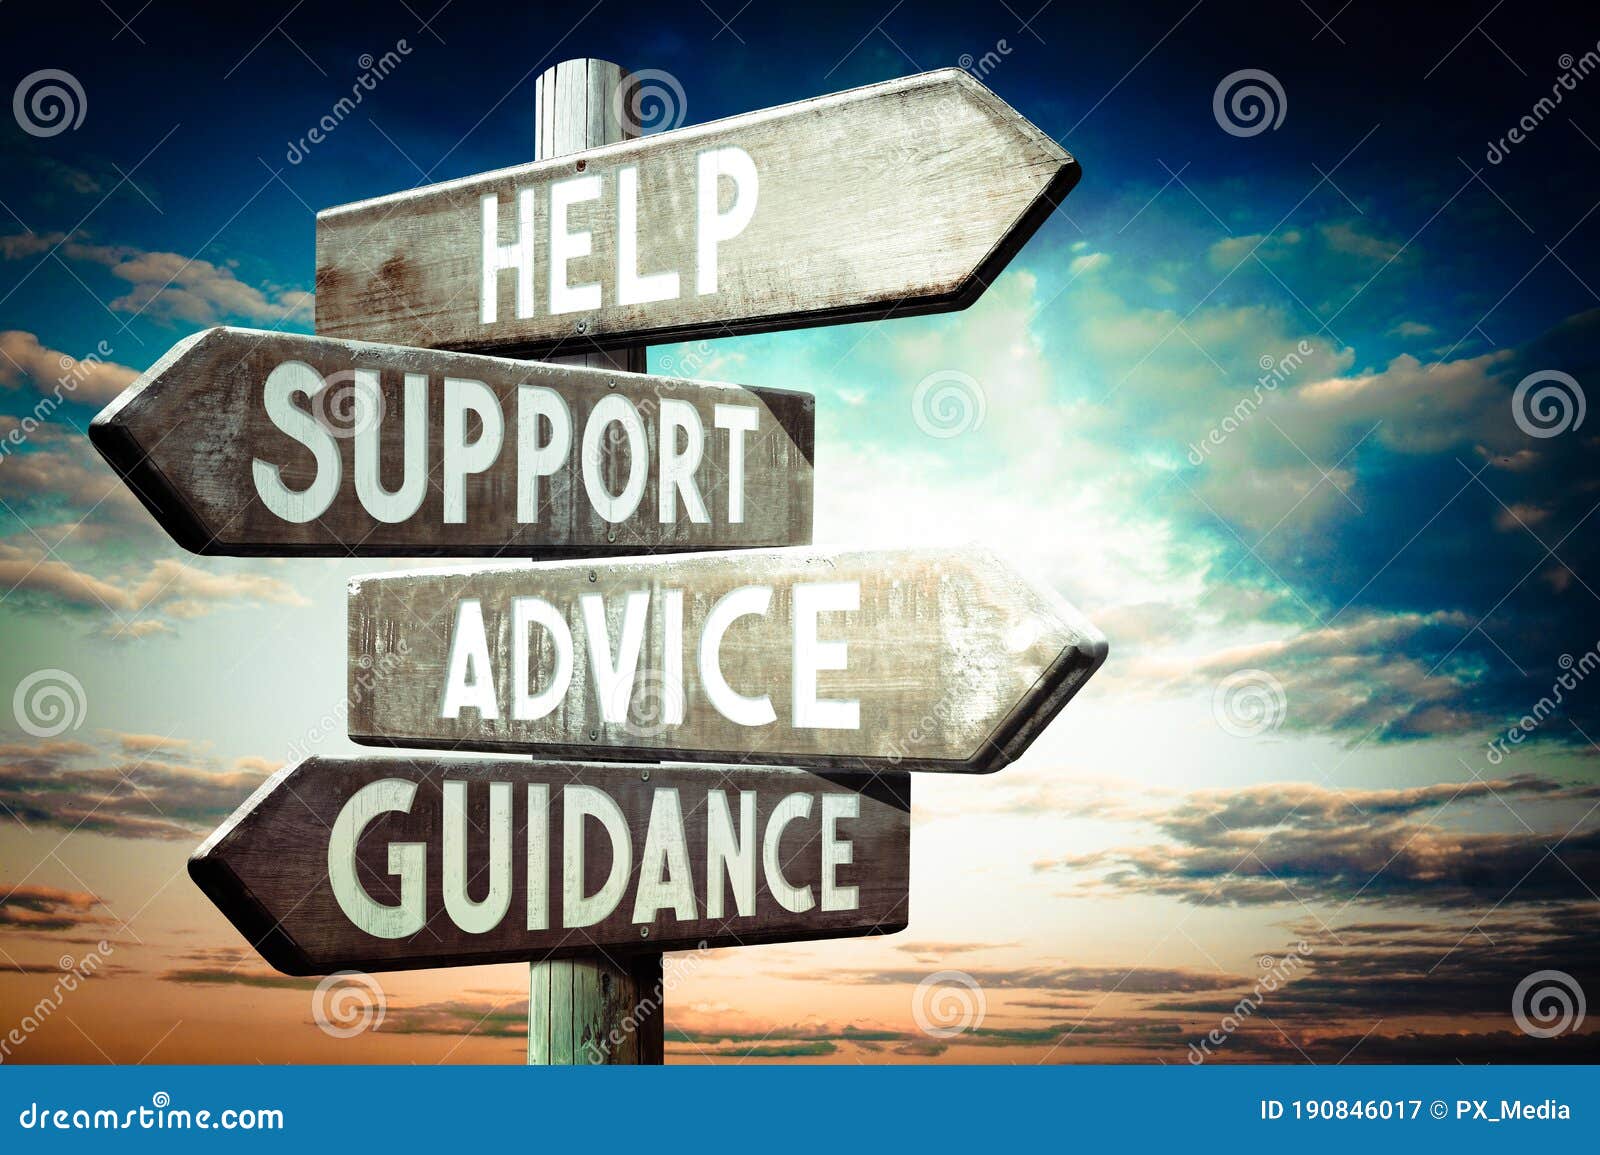 help, support, advice, guidance - wooden signpost, roadsign with four arrows